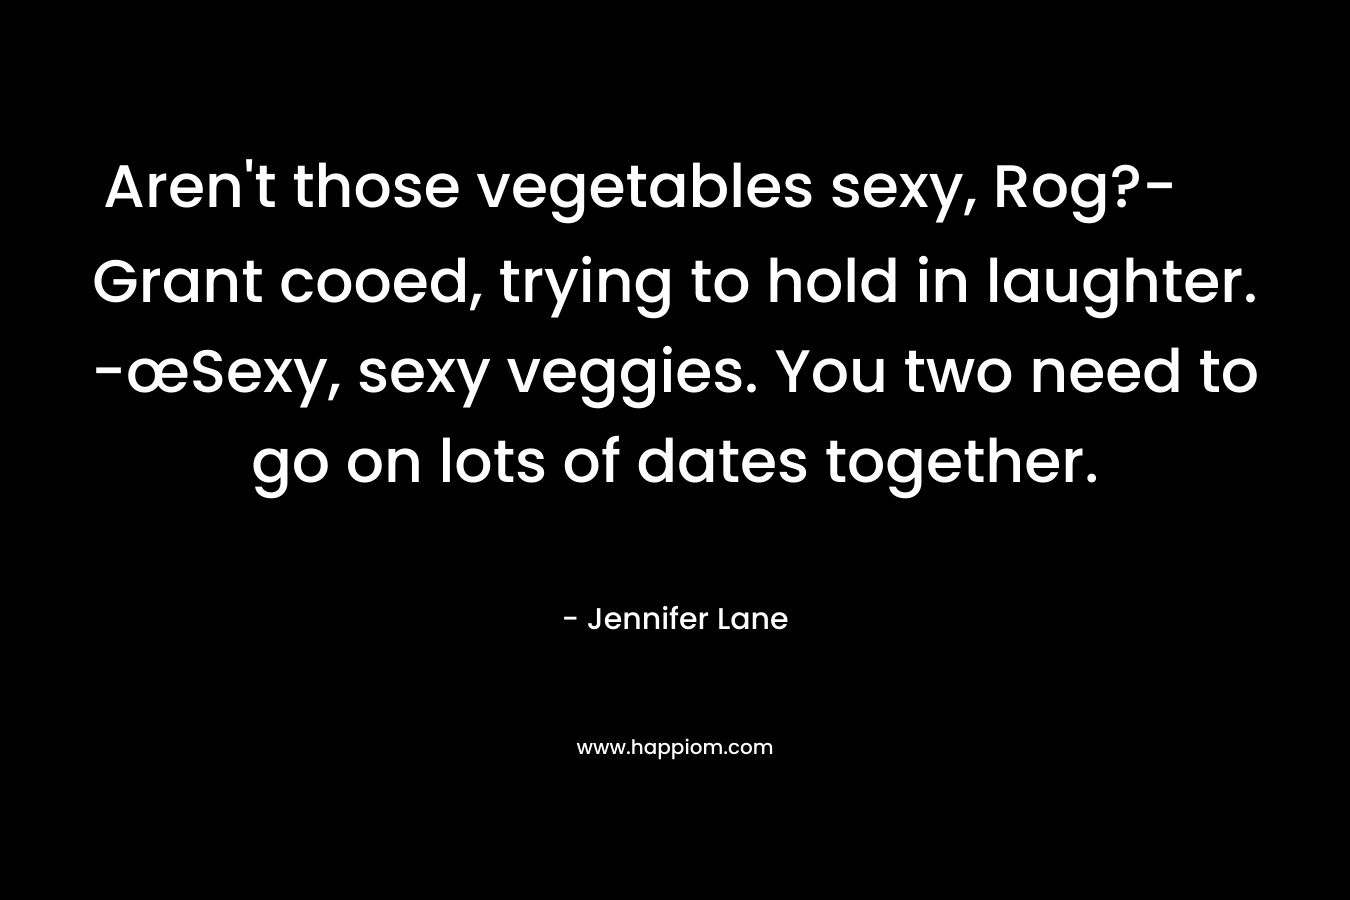 Aren’t those vegetables sexy, Rog?- Grant cooed, trying to hold in laughter. -œSexy, sexy veggies. You two need to go on lots of dates together. – Jennifer Lane